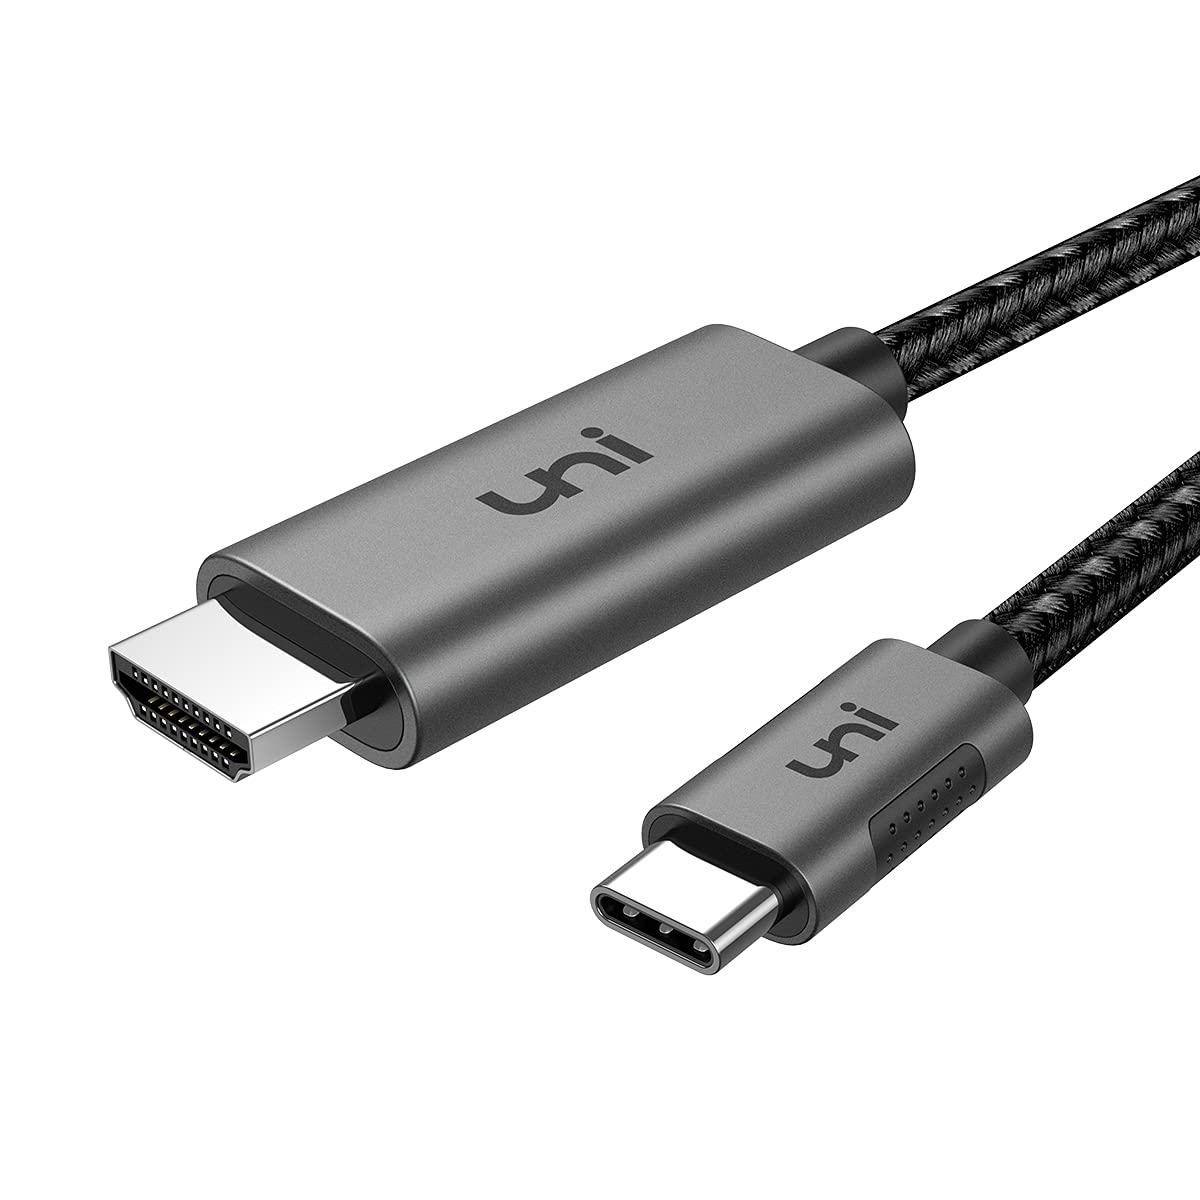 uni USB C to HDMI Cable for Home Office 6ft (4K@60Hz), USB Type C to HDMI Cable, Thunderbolt 4/3 Compatible with MacBook Pro 2021/2020, MacBook Air, iPad Pro 2021, Surface Book 2, Galaxy S23 and More